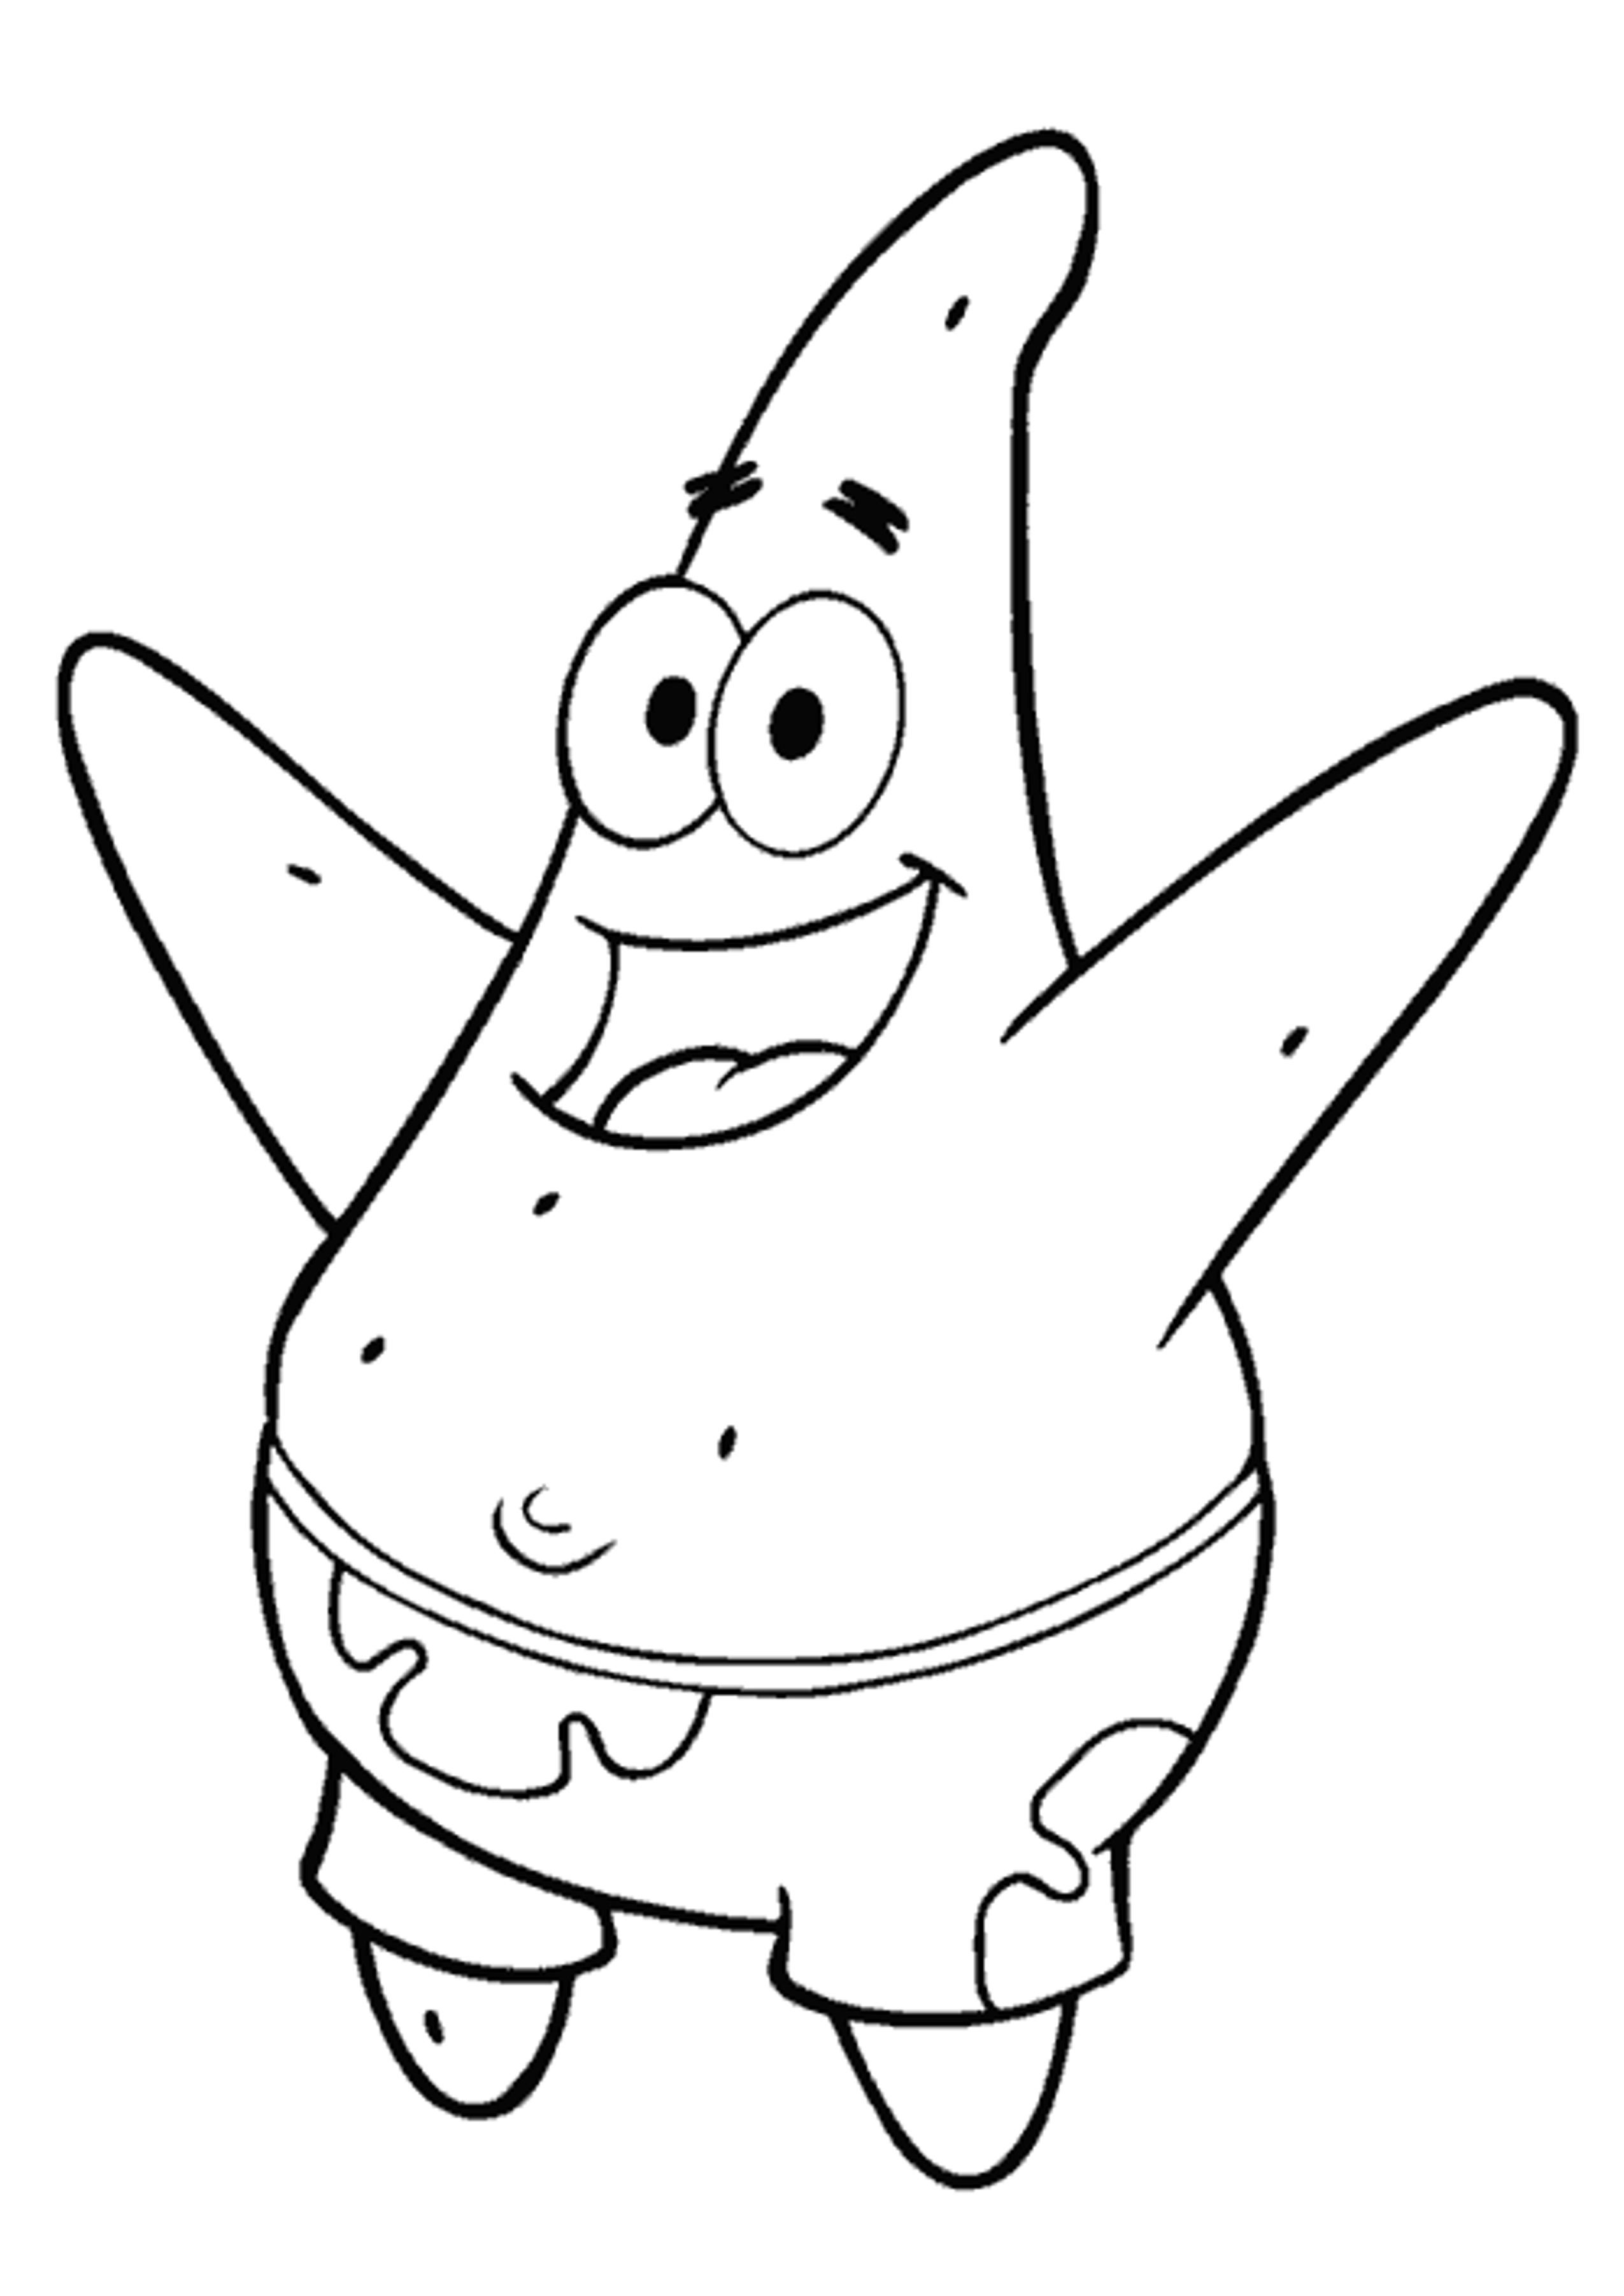 Funny Spongebob Coloring Pages Printables 34